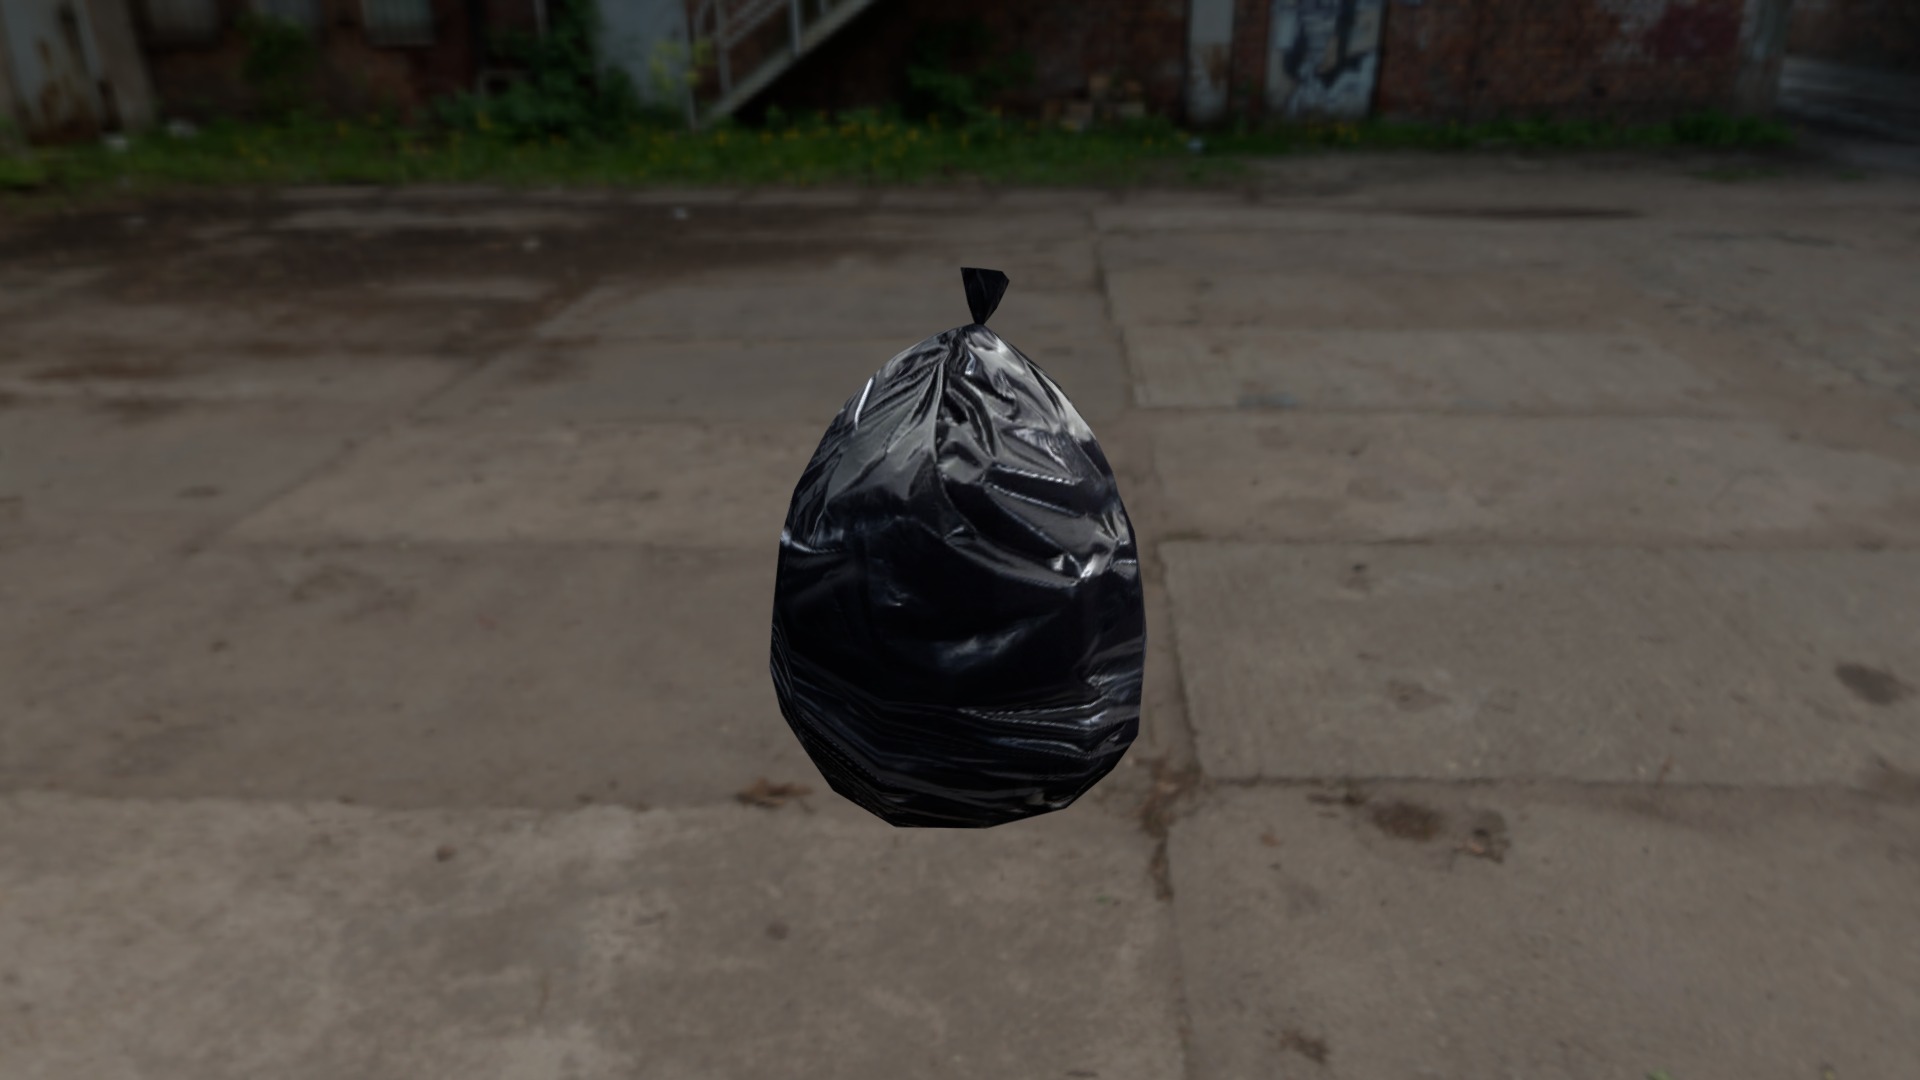 3D model Garbage package - This is a 3D model of the Garbage package. The 3D model is about a black bag on a concrete surface.